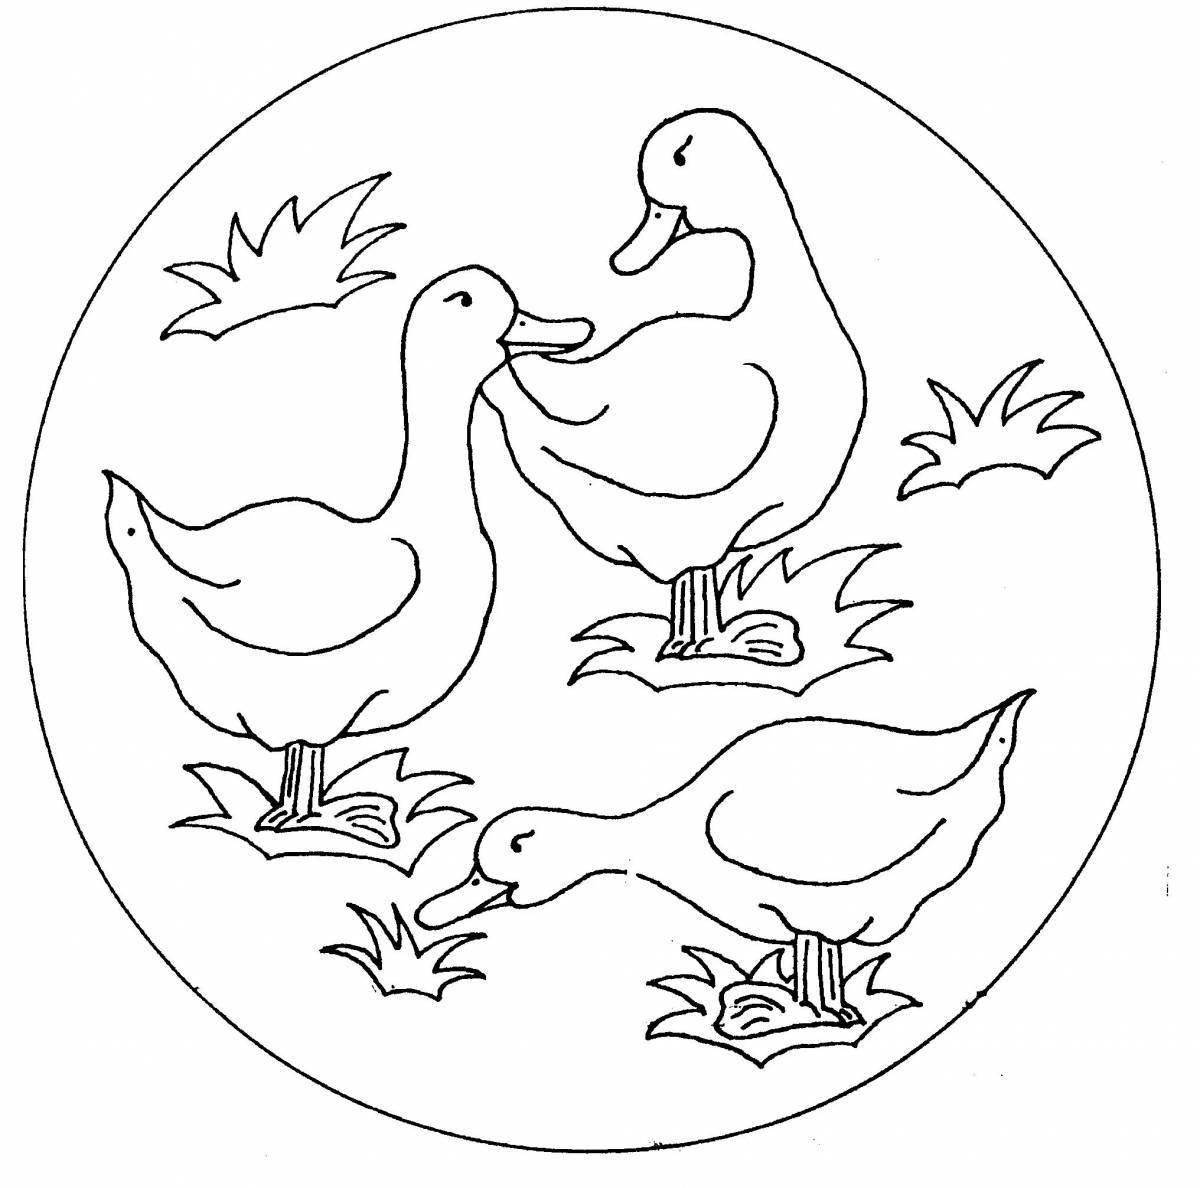 Coloring book exquisite duck and duckling